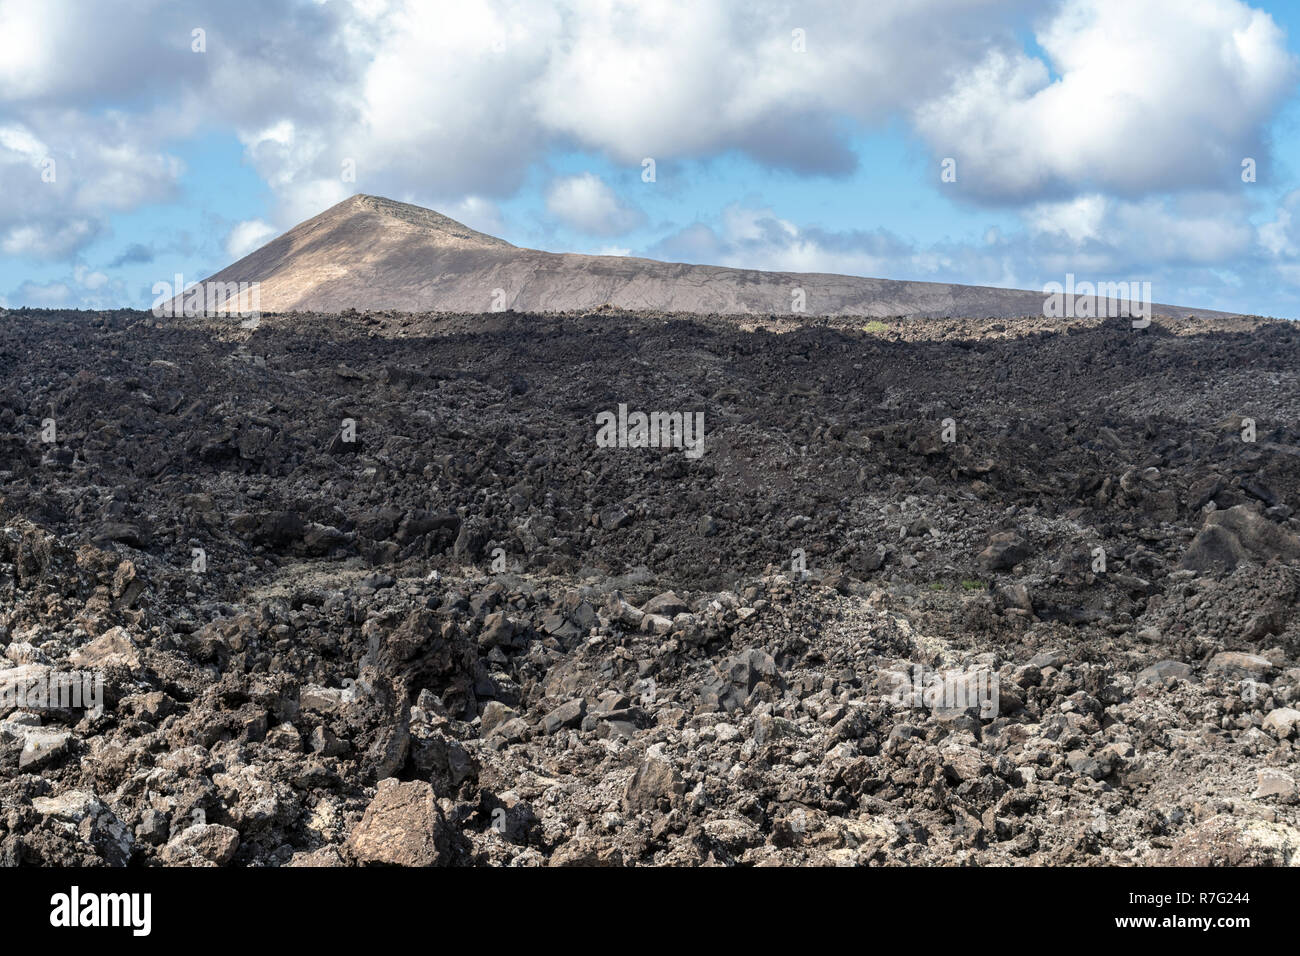 Volcanic landscape with lava rock formation, Lanzarote Island, Canary Islands, Spain Stock Photo